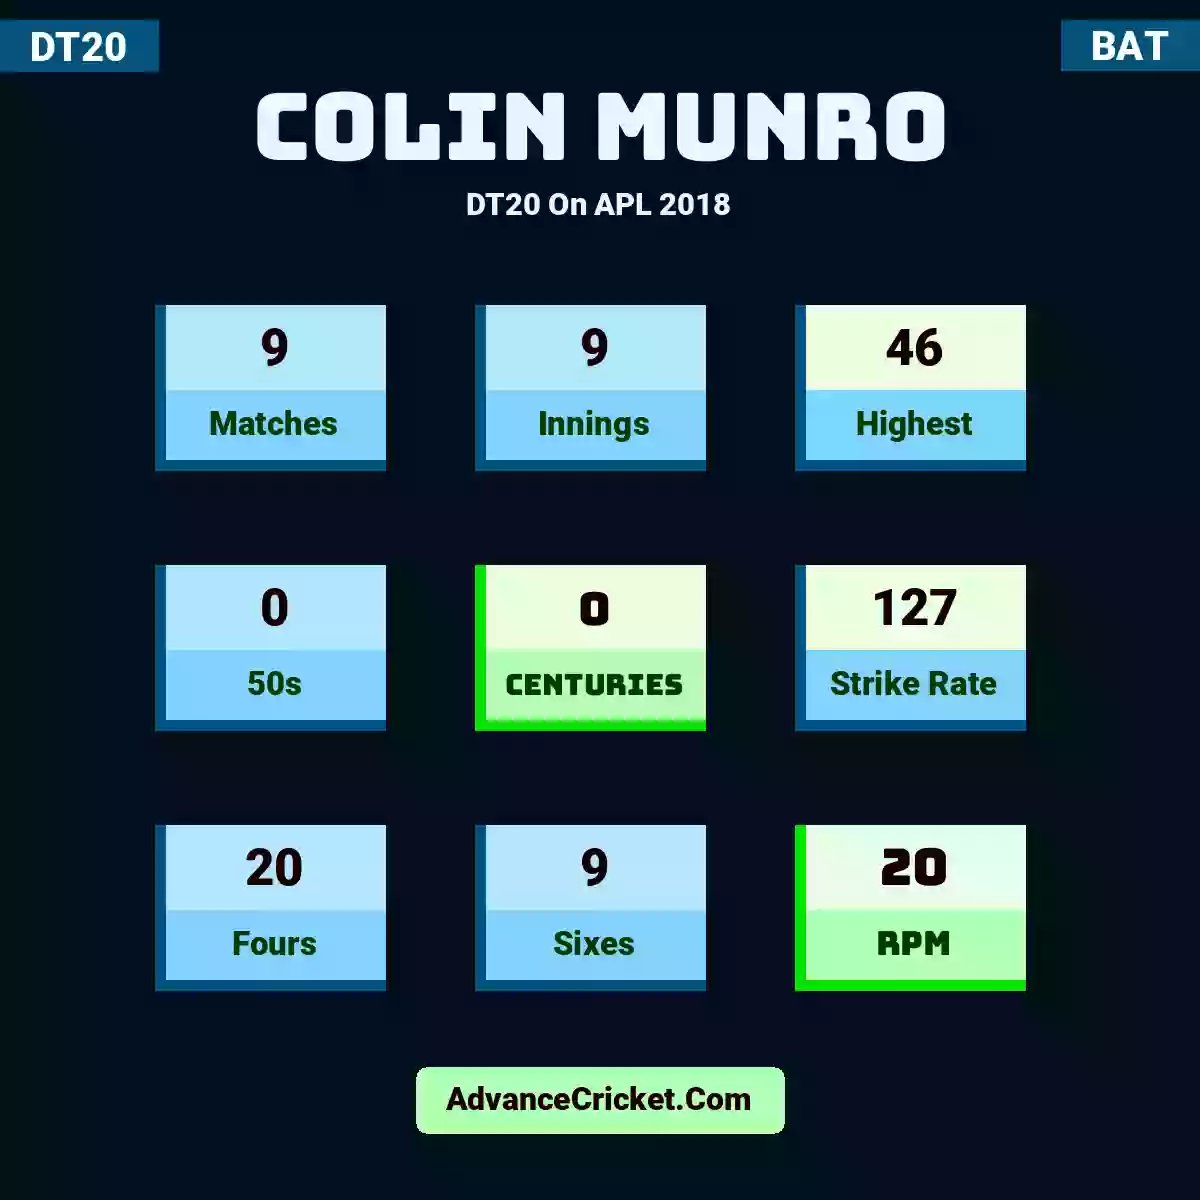 Colin Munro DT20  On APL 2018, Colin Munro played 9 matches, scored 46 runs as highest, 0 half-centuries, and 0 centuries, with a strike rate of 127. C.Munro hit 20 fours and 9 sixes, with an RPM of 20.